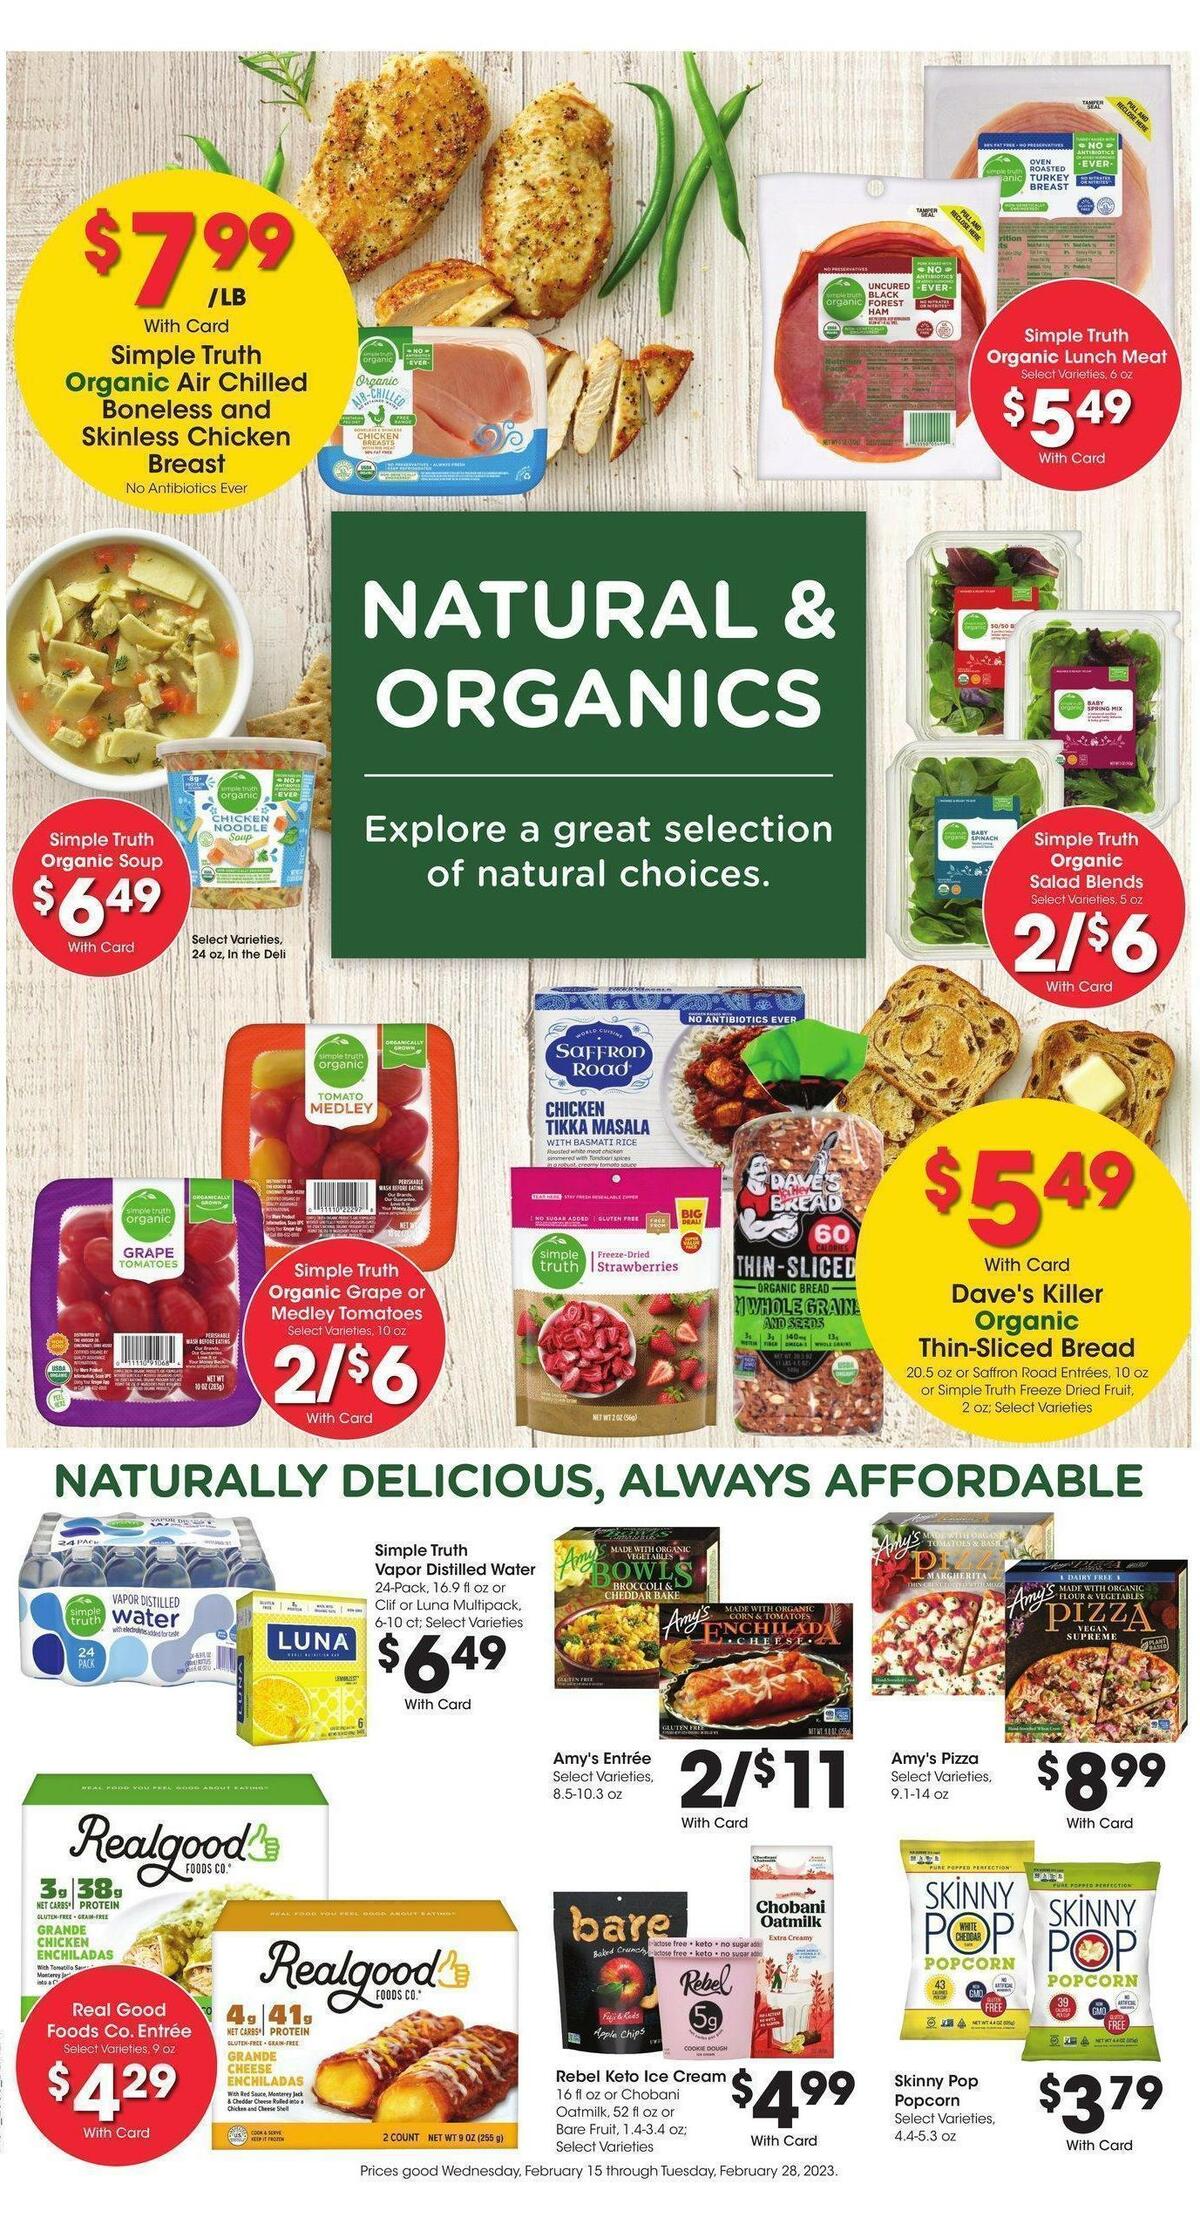 Kroger Weekly Ad from February 15